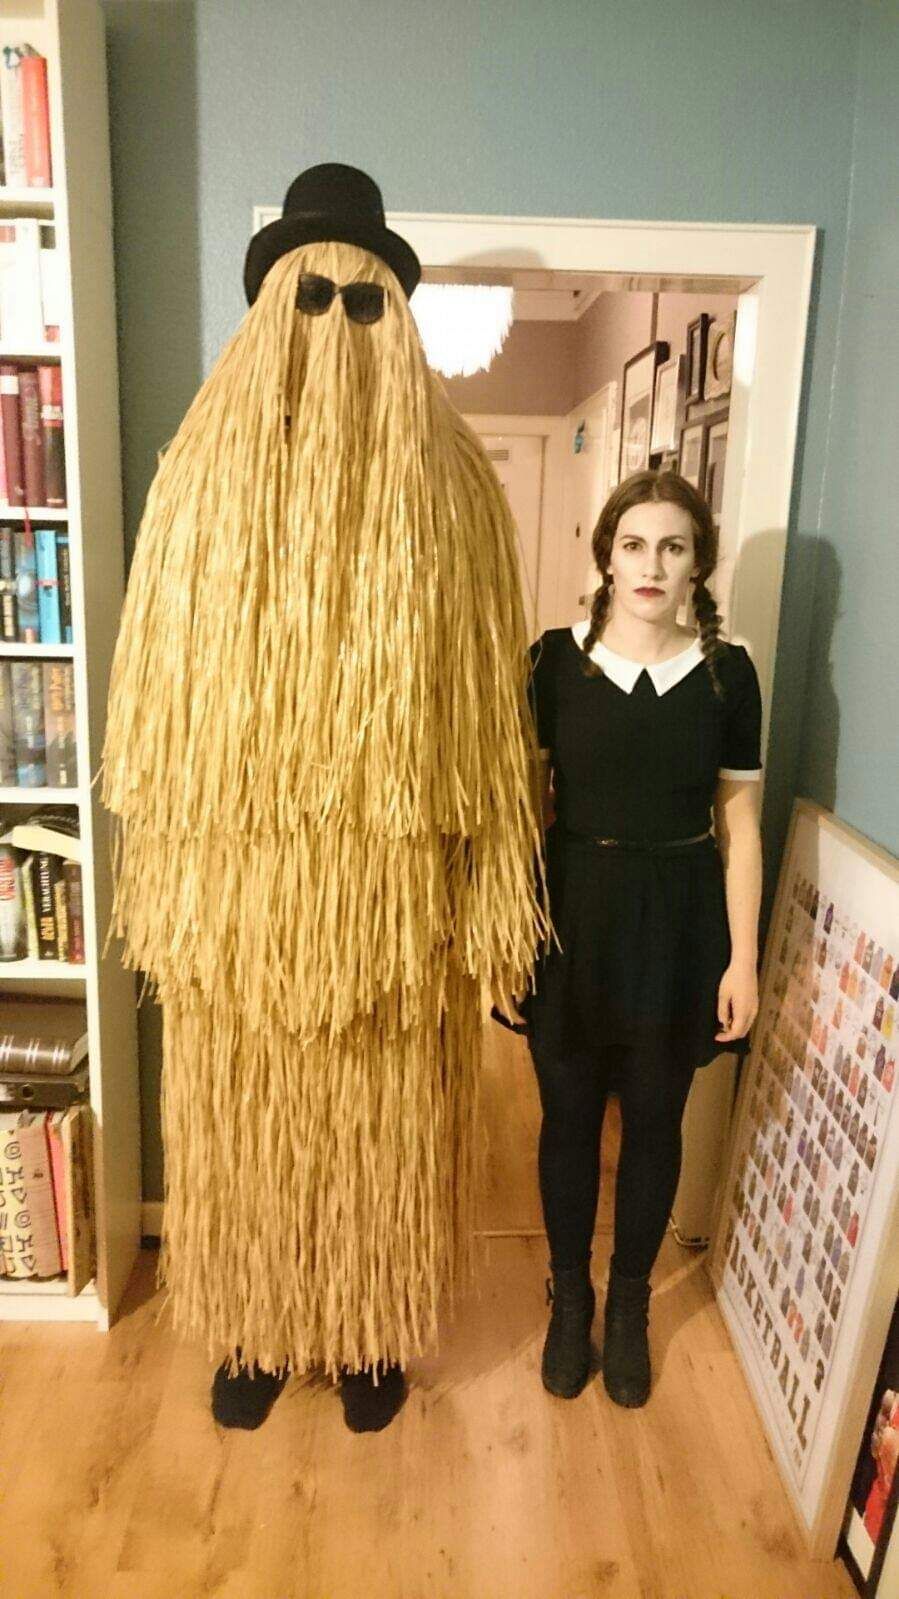 My wife and I as Cousin It and Wednesday